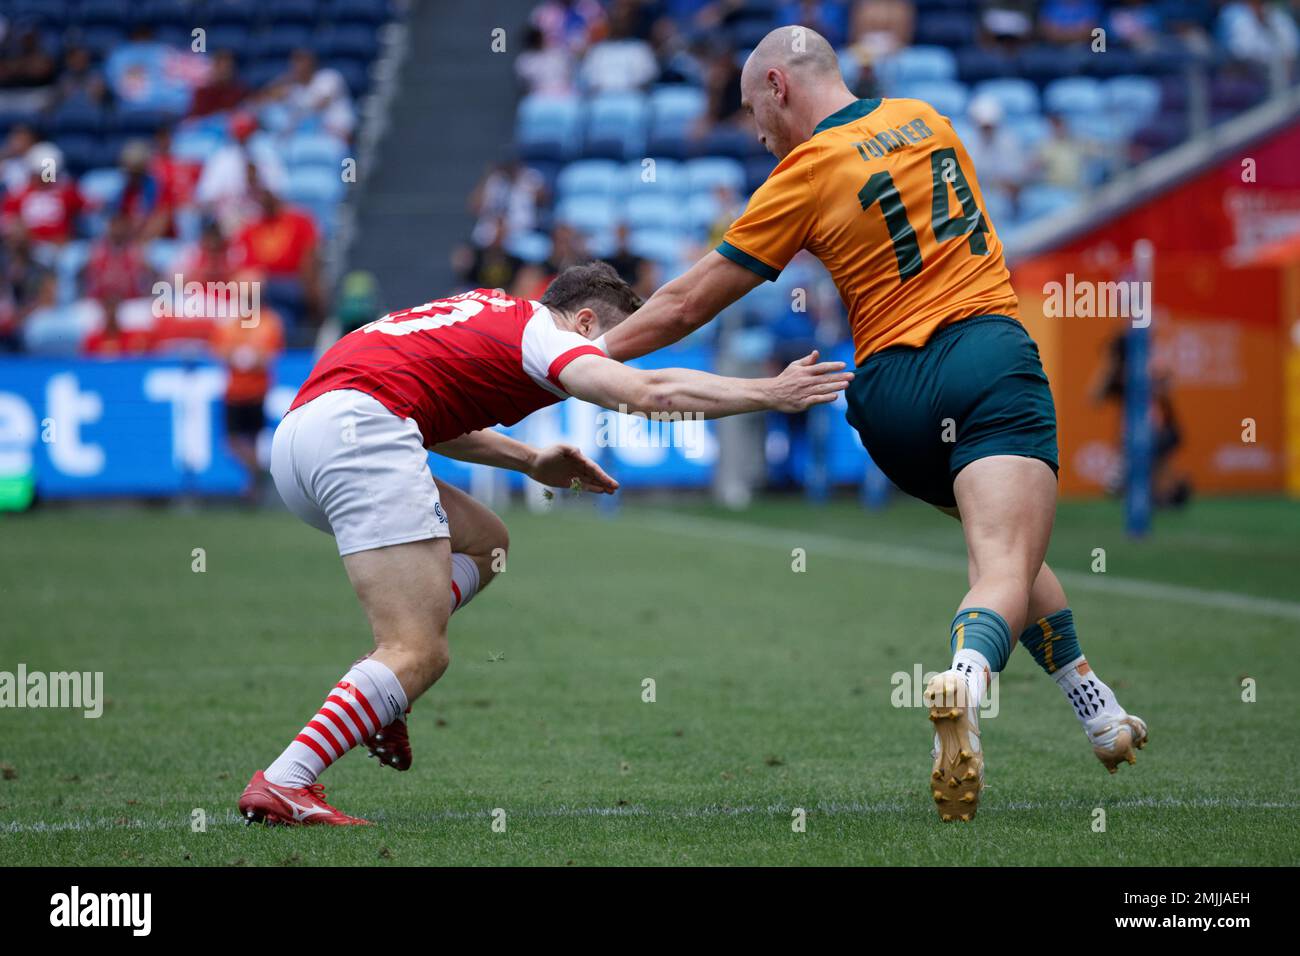 James Turner of Australia is tackled during the 2023 Sydney Sevens match between Australia and Great Britain at Allianz Stadium on January 27, 2023 in Sydney, Australia Stock Photo